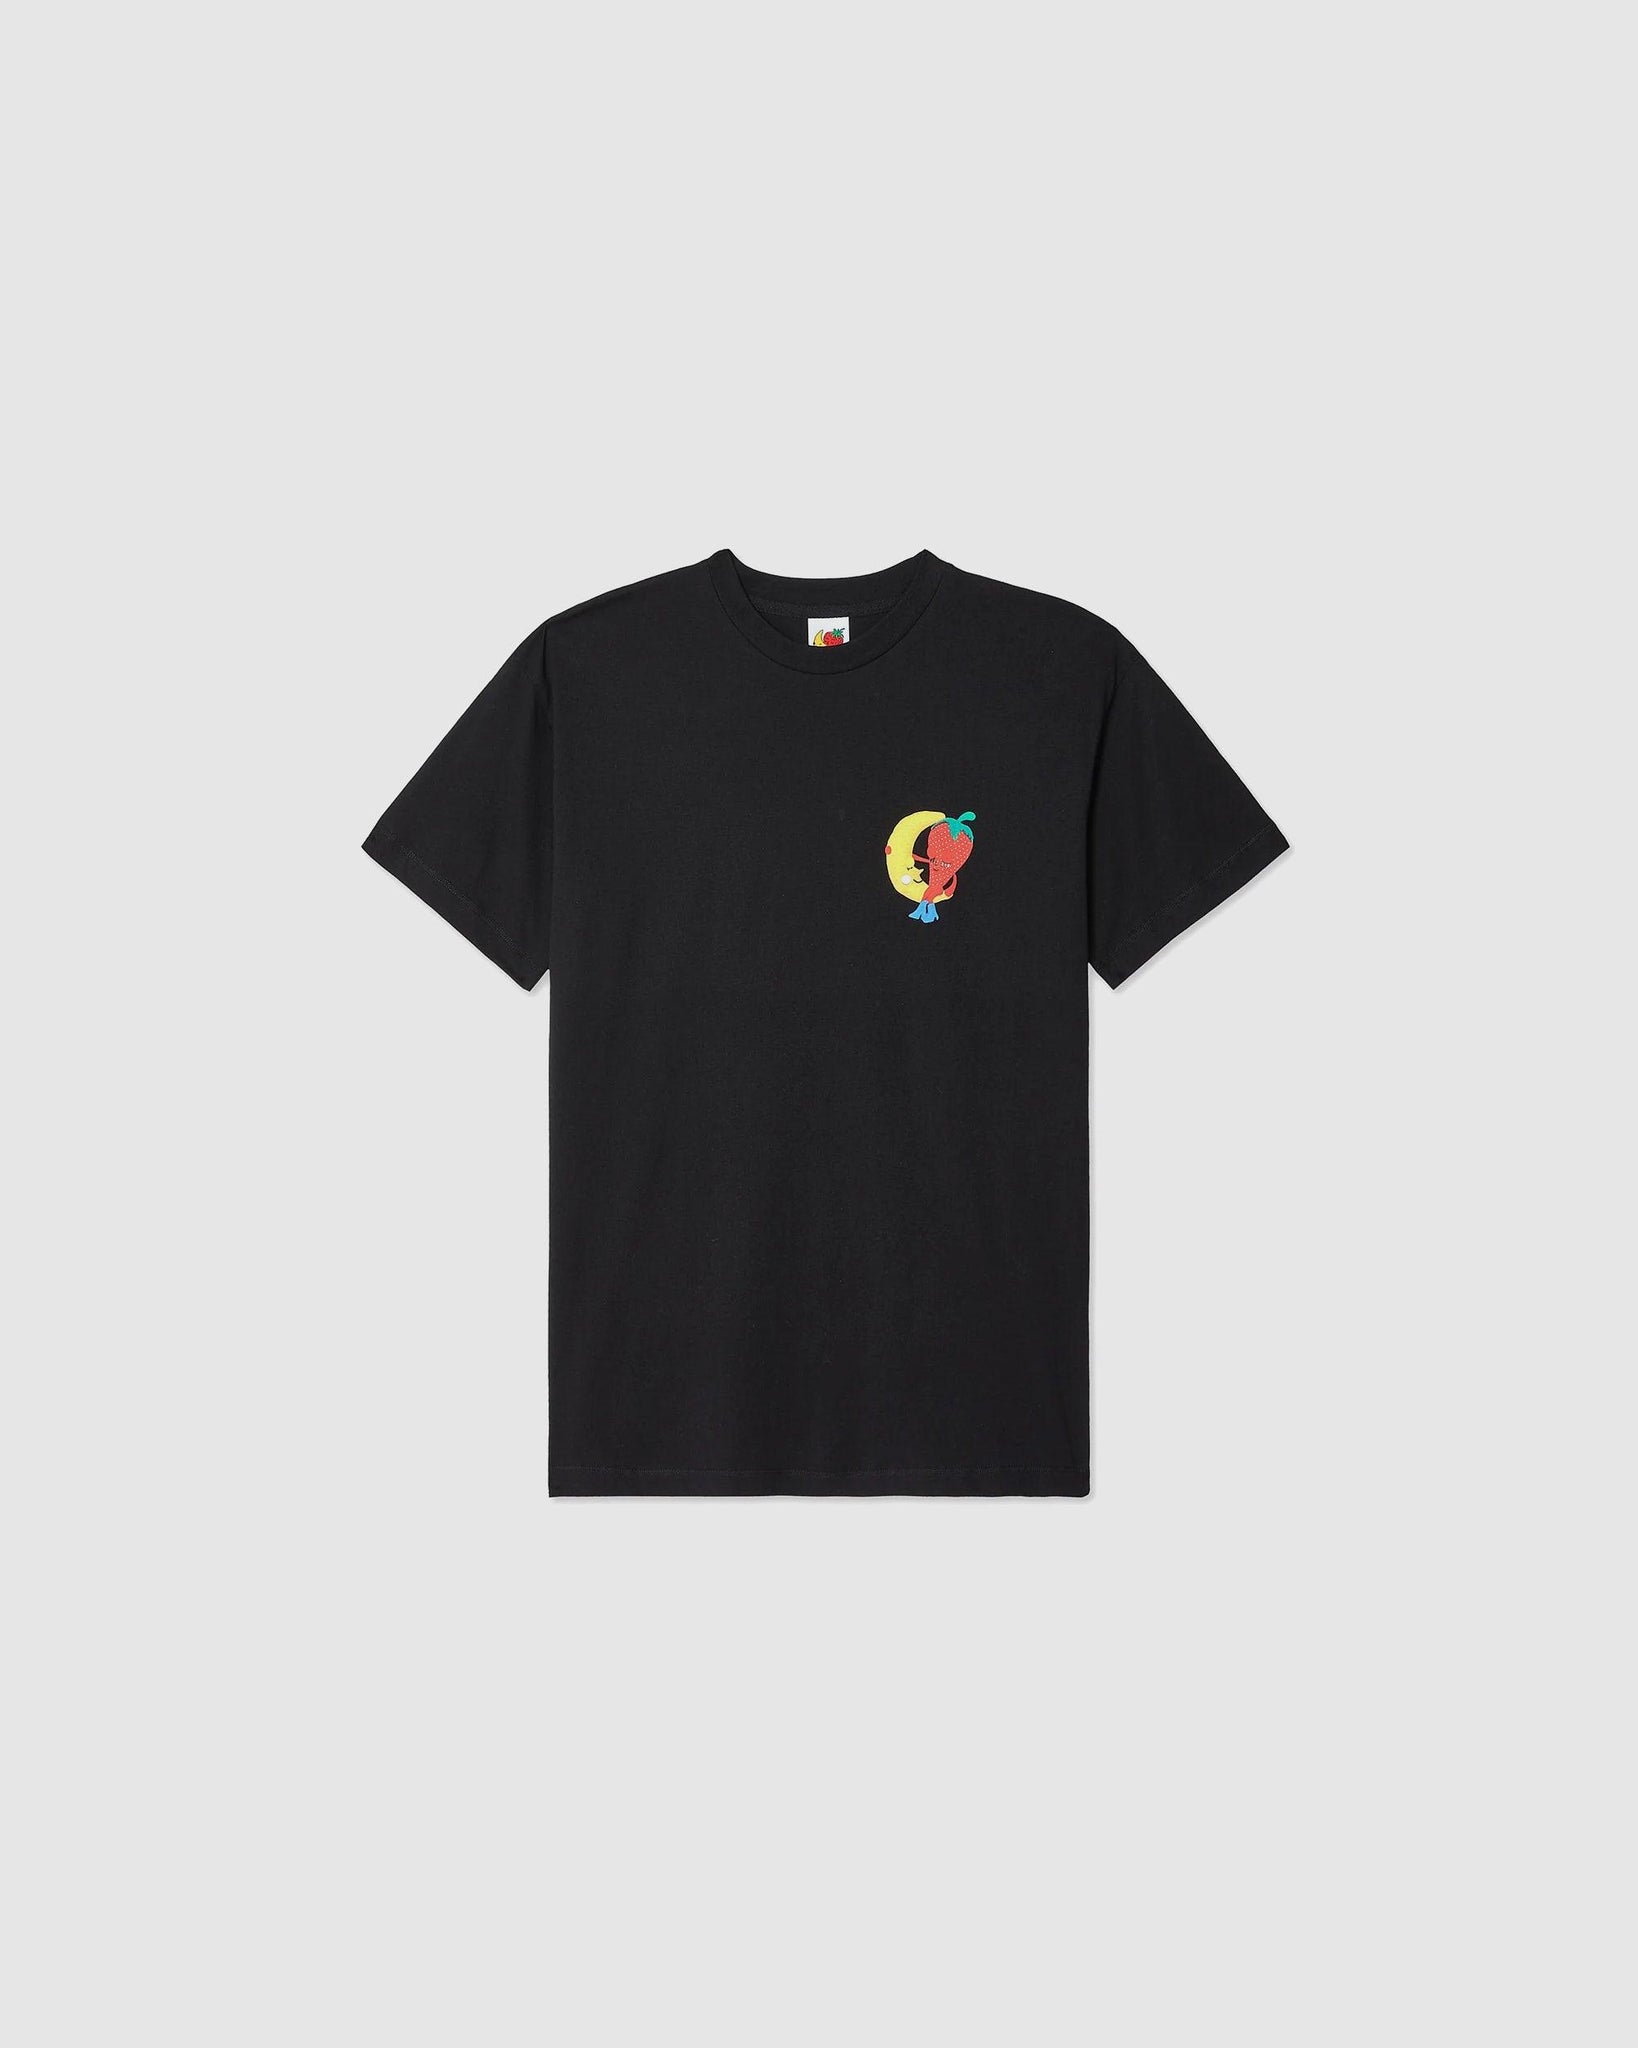 Perennial Shana Graphic T-Shirt Black - {{ collection.title }} - Chinatown Country Club 